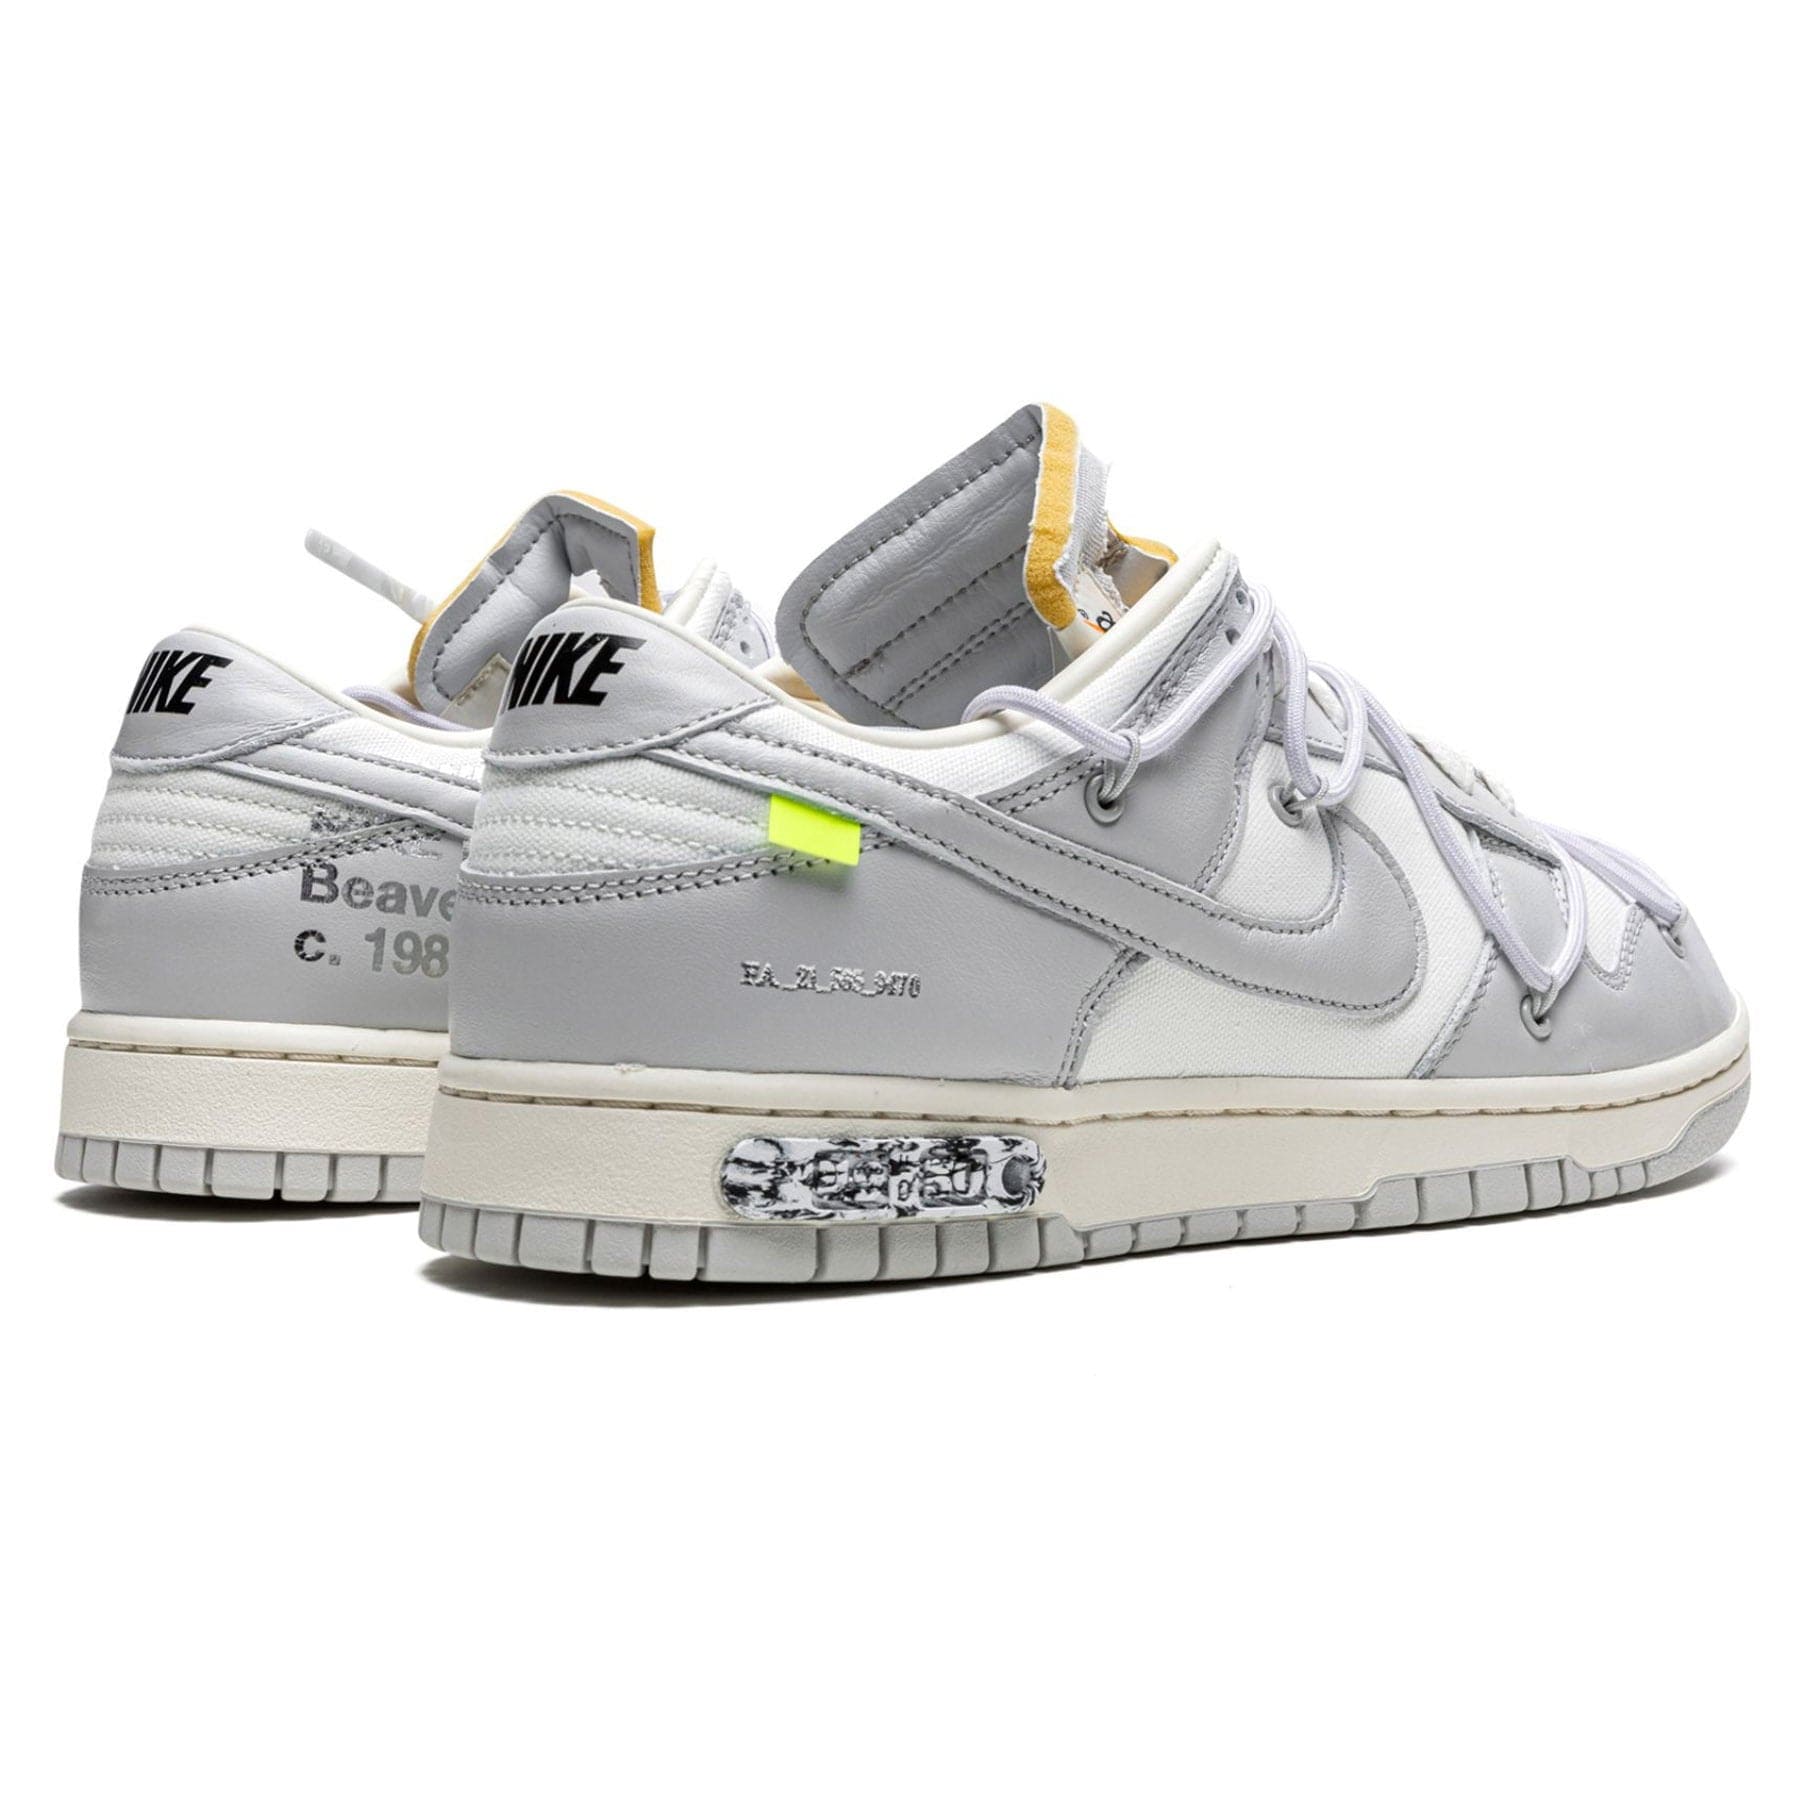 Off-White Nike dunk low lot49 ダンク 49/50